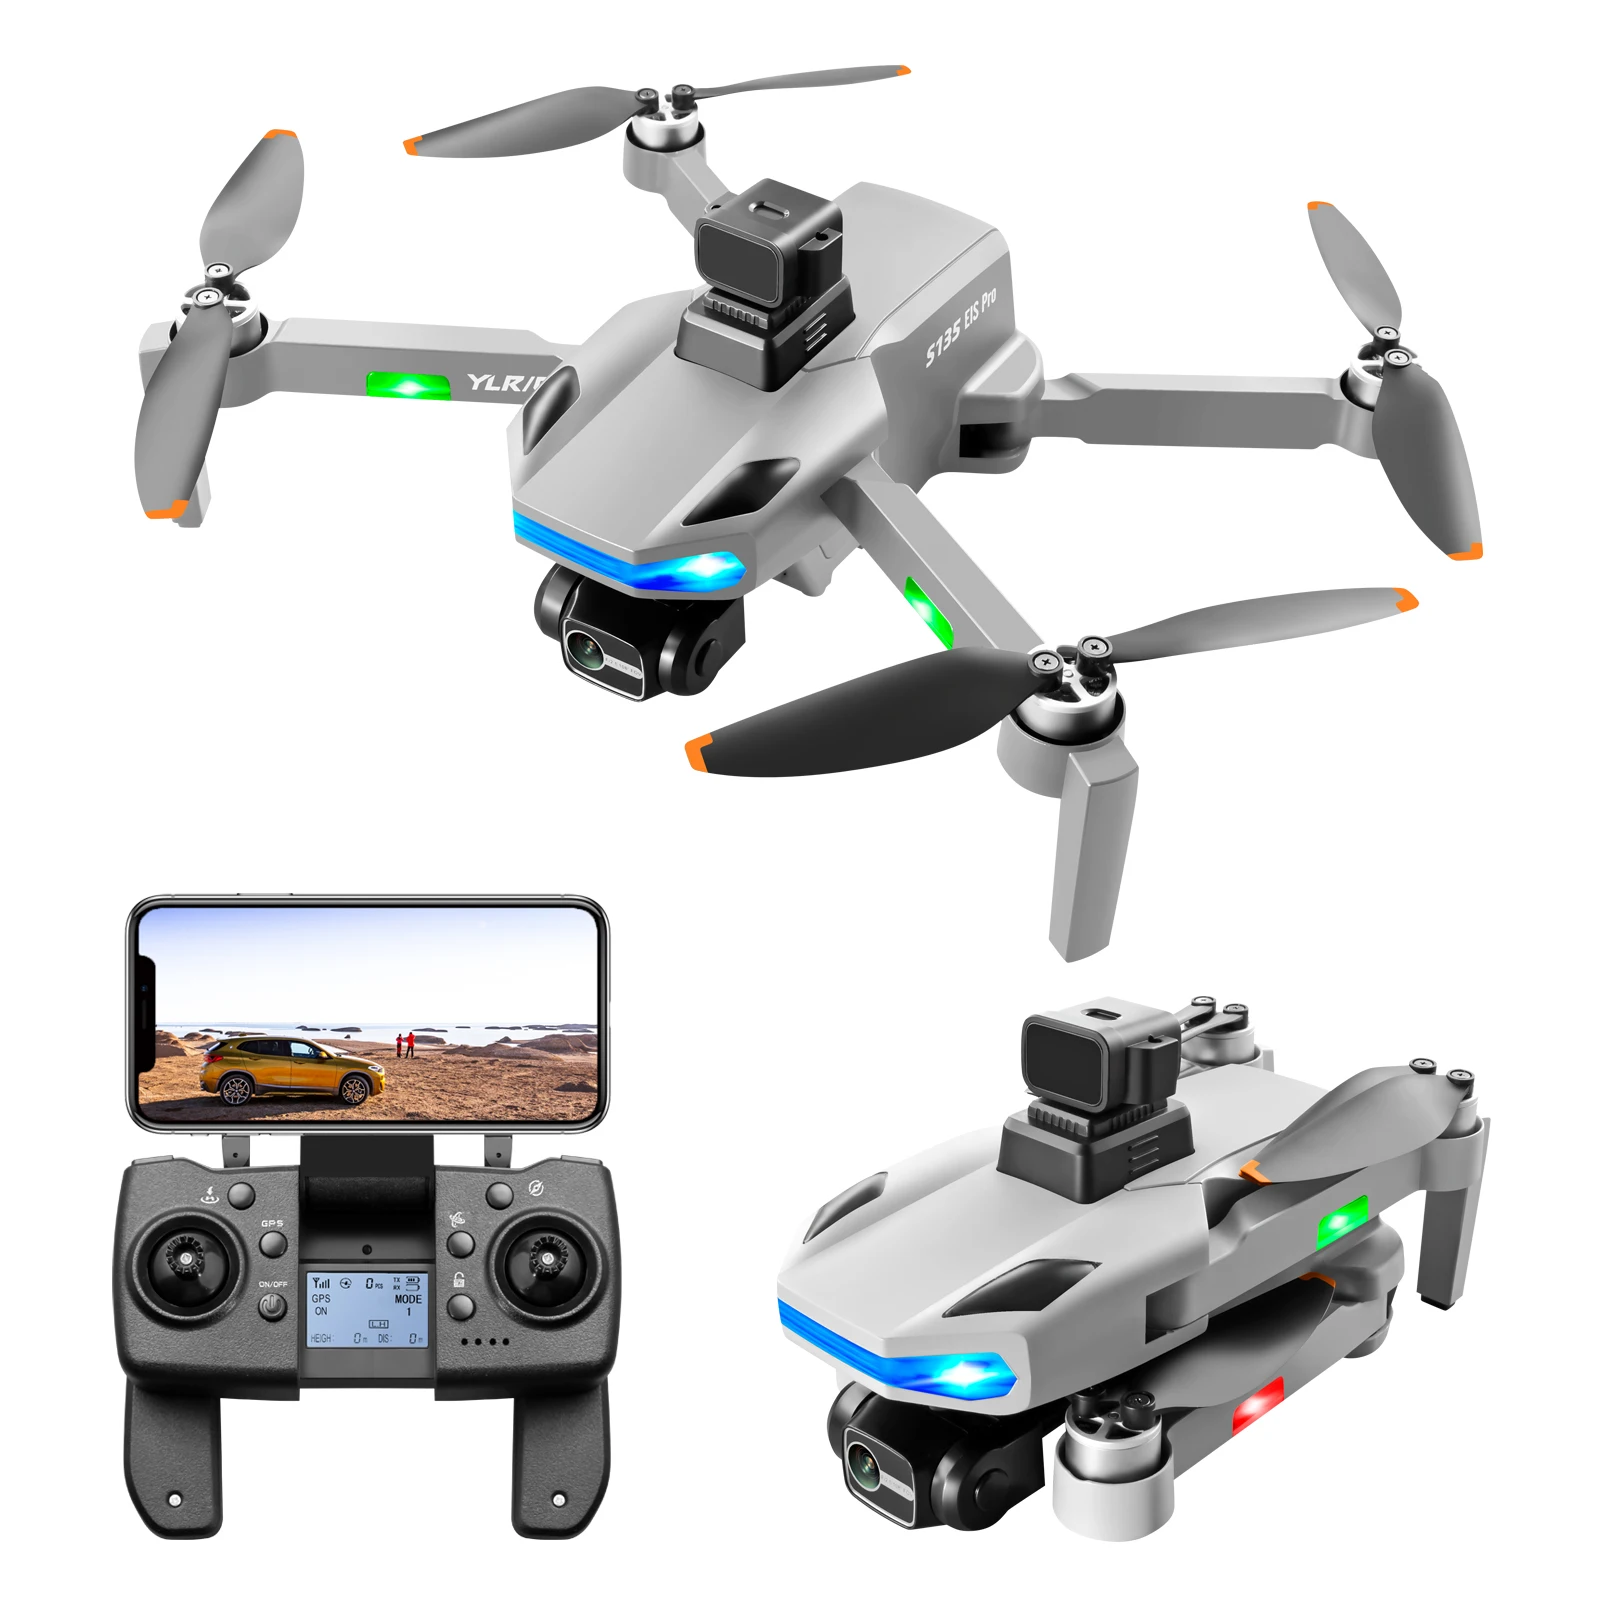 

KAI ONE MAX Drone 8K Camera 3-Axis Gimbal Anti-Shake Laser obstacle avoidance Brushless Foldable Quadcopter Drone